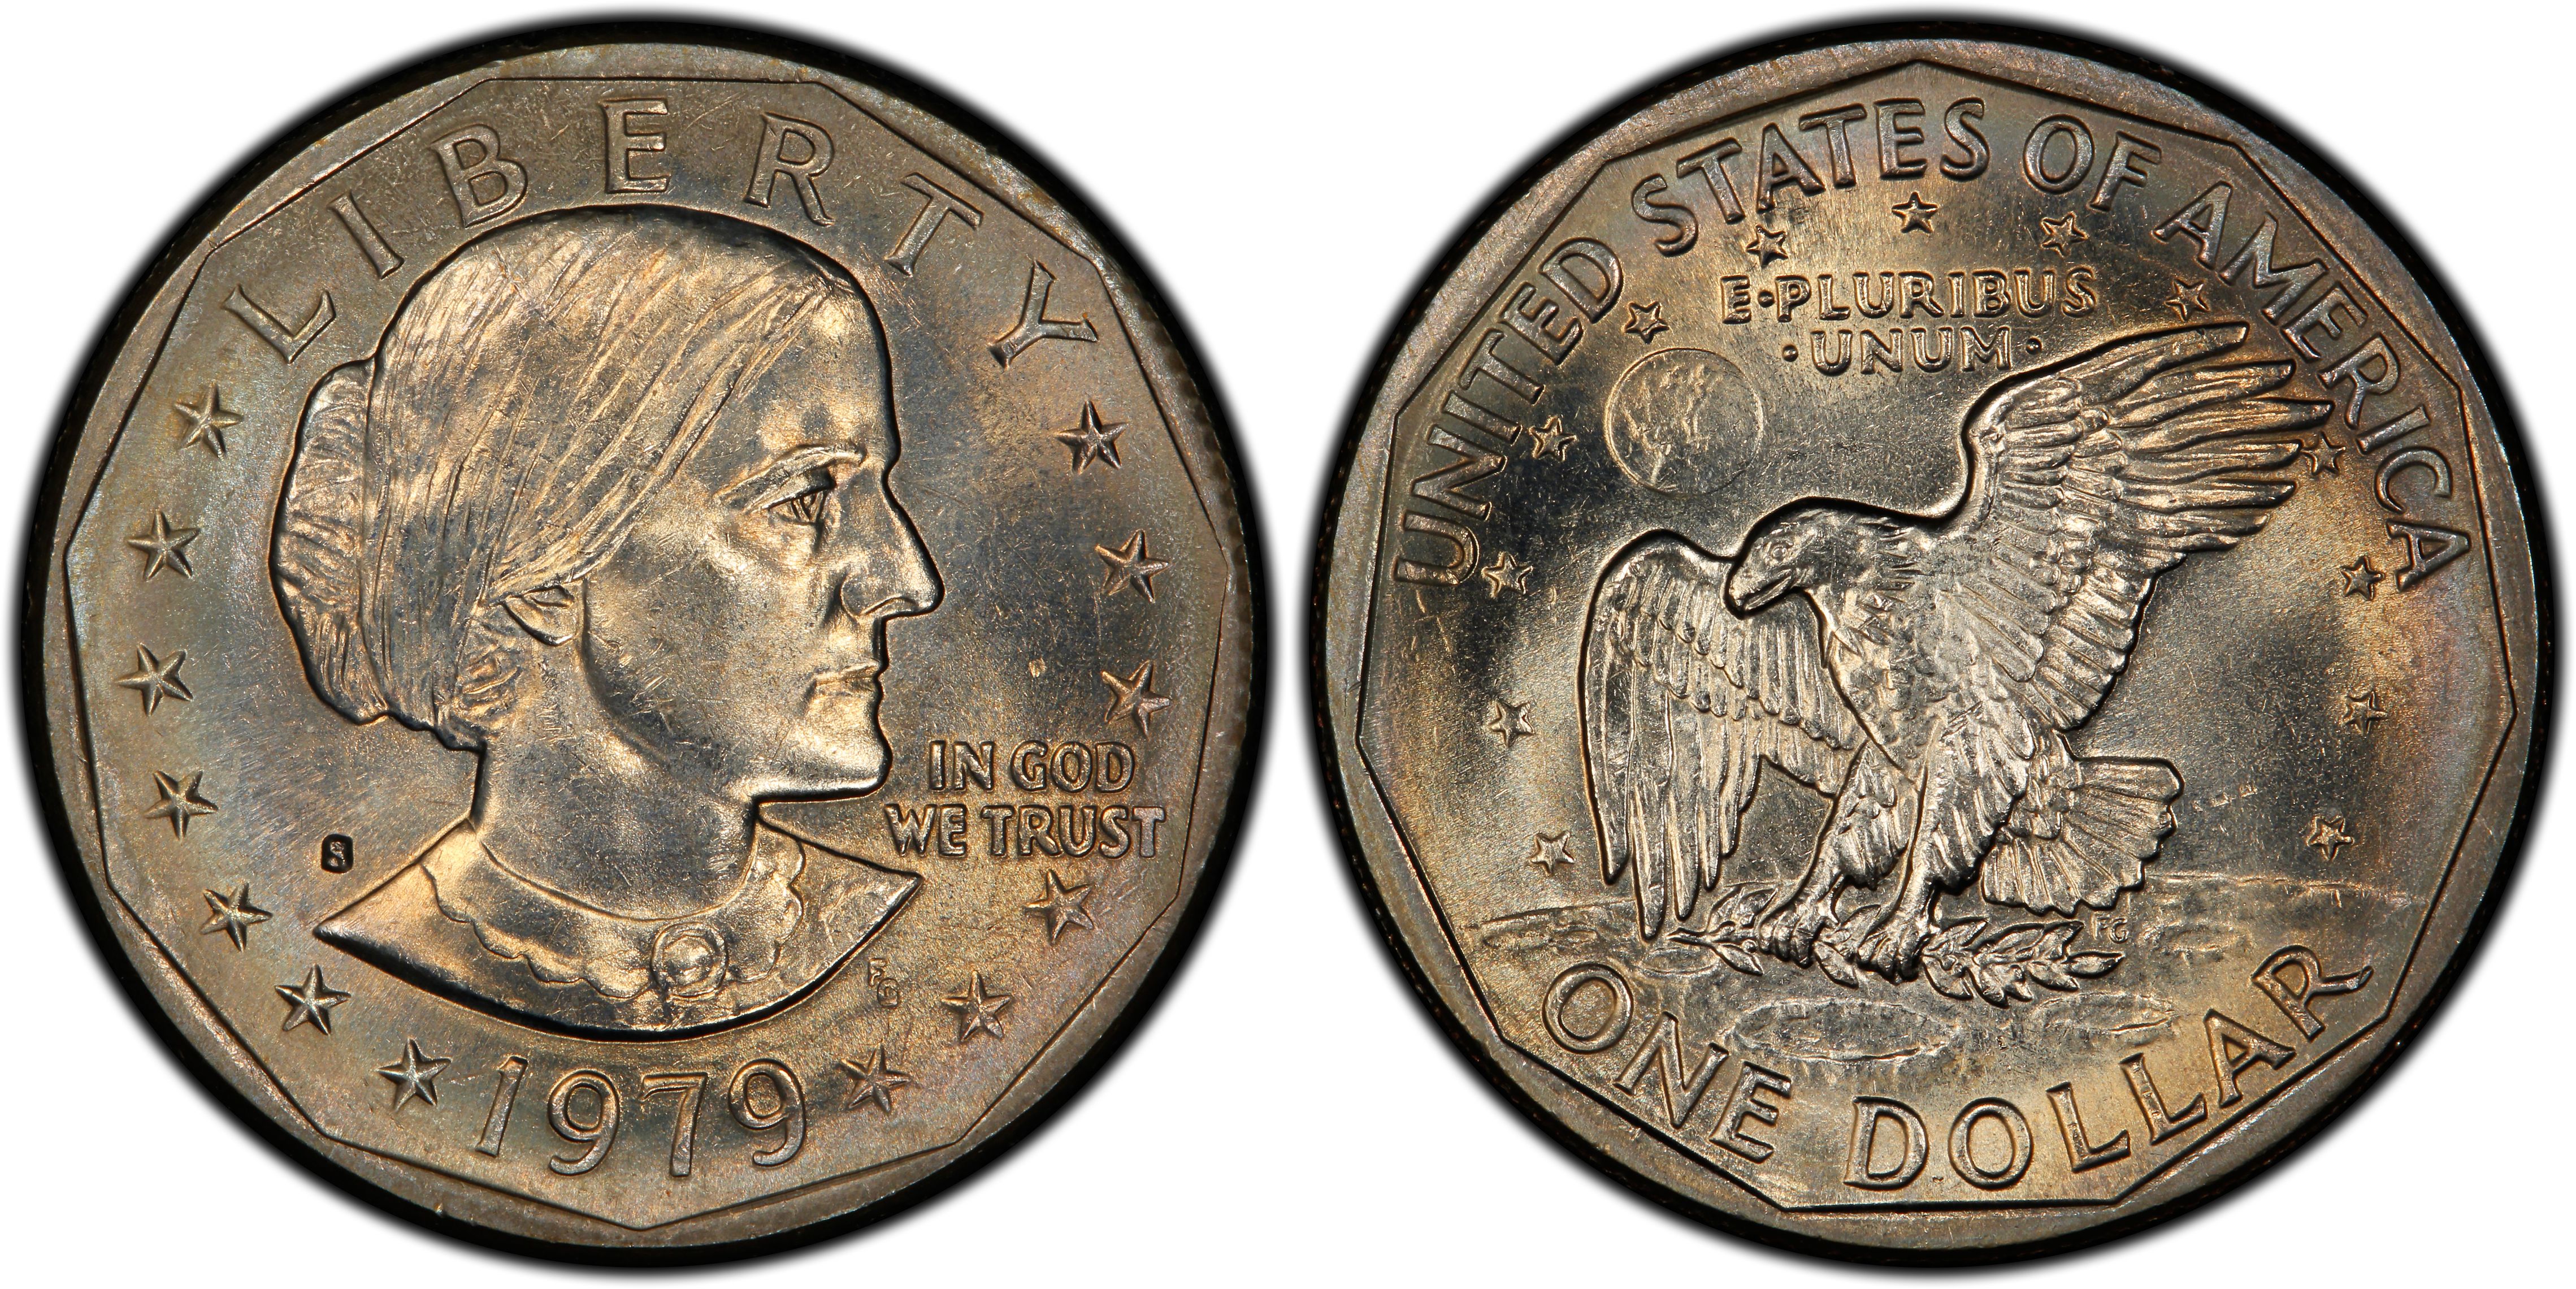 Images of Susan B. Anthony Dollar 1979-S SBA$1 - PCGS CoinFacts2200 x 1101